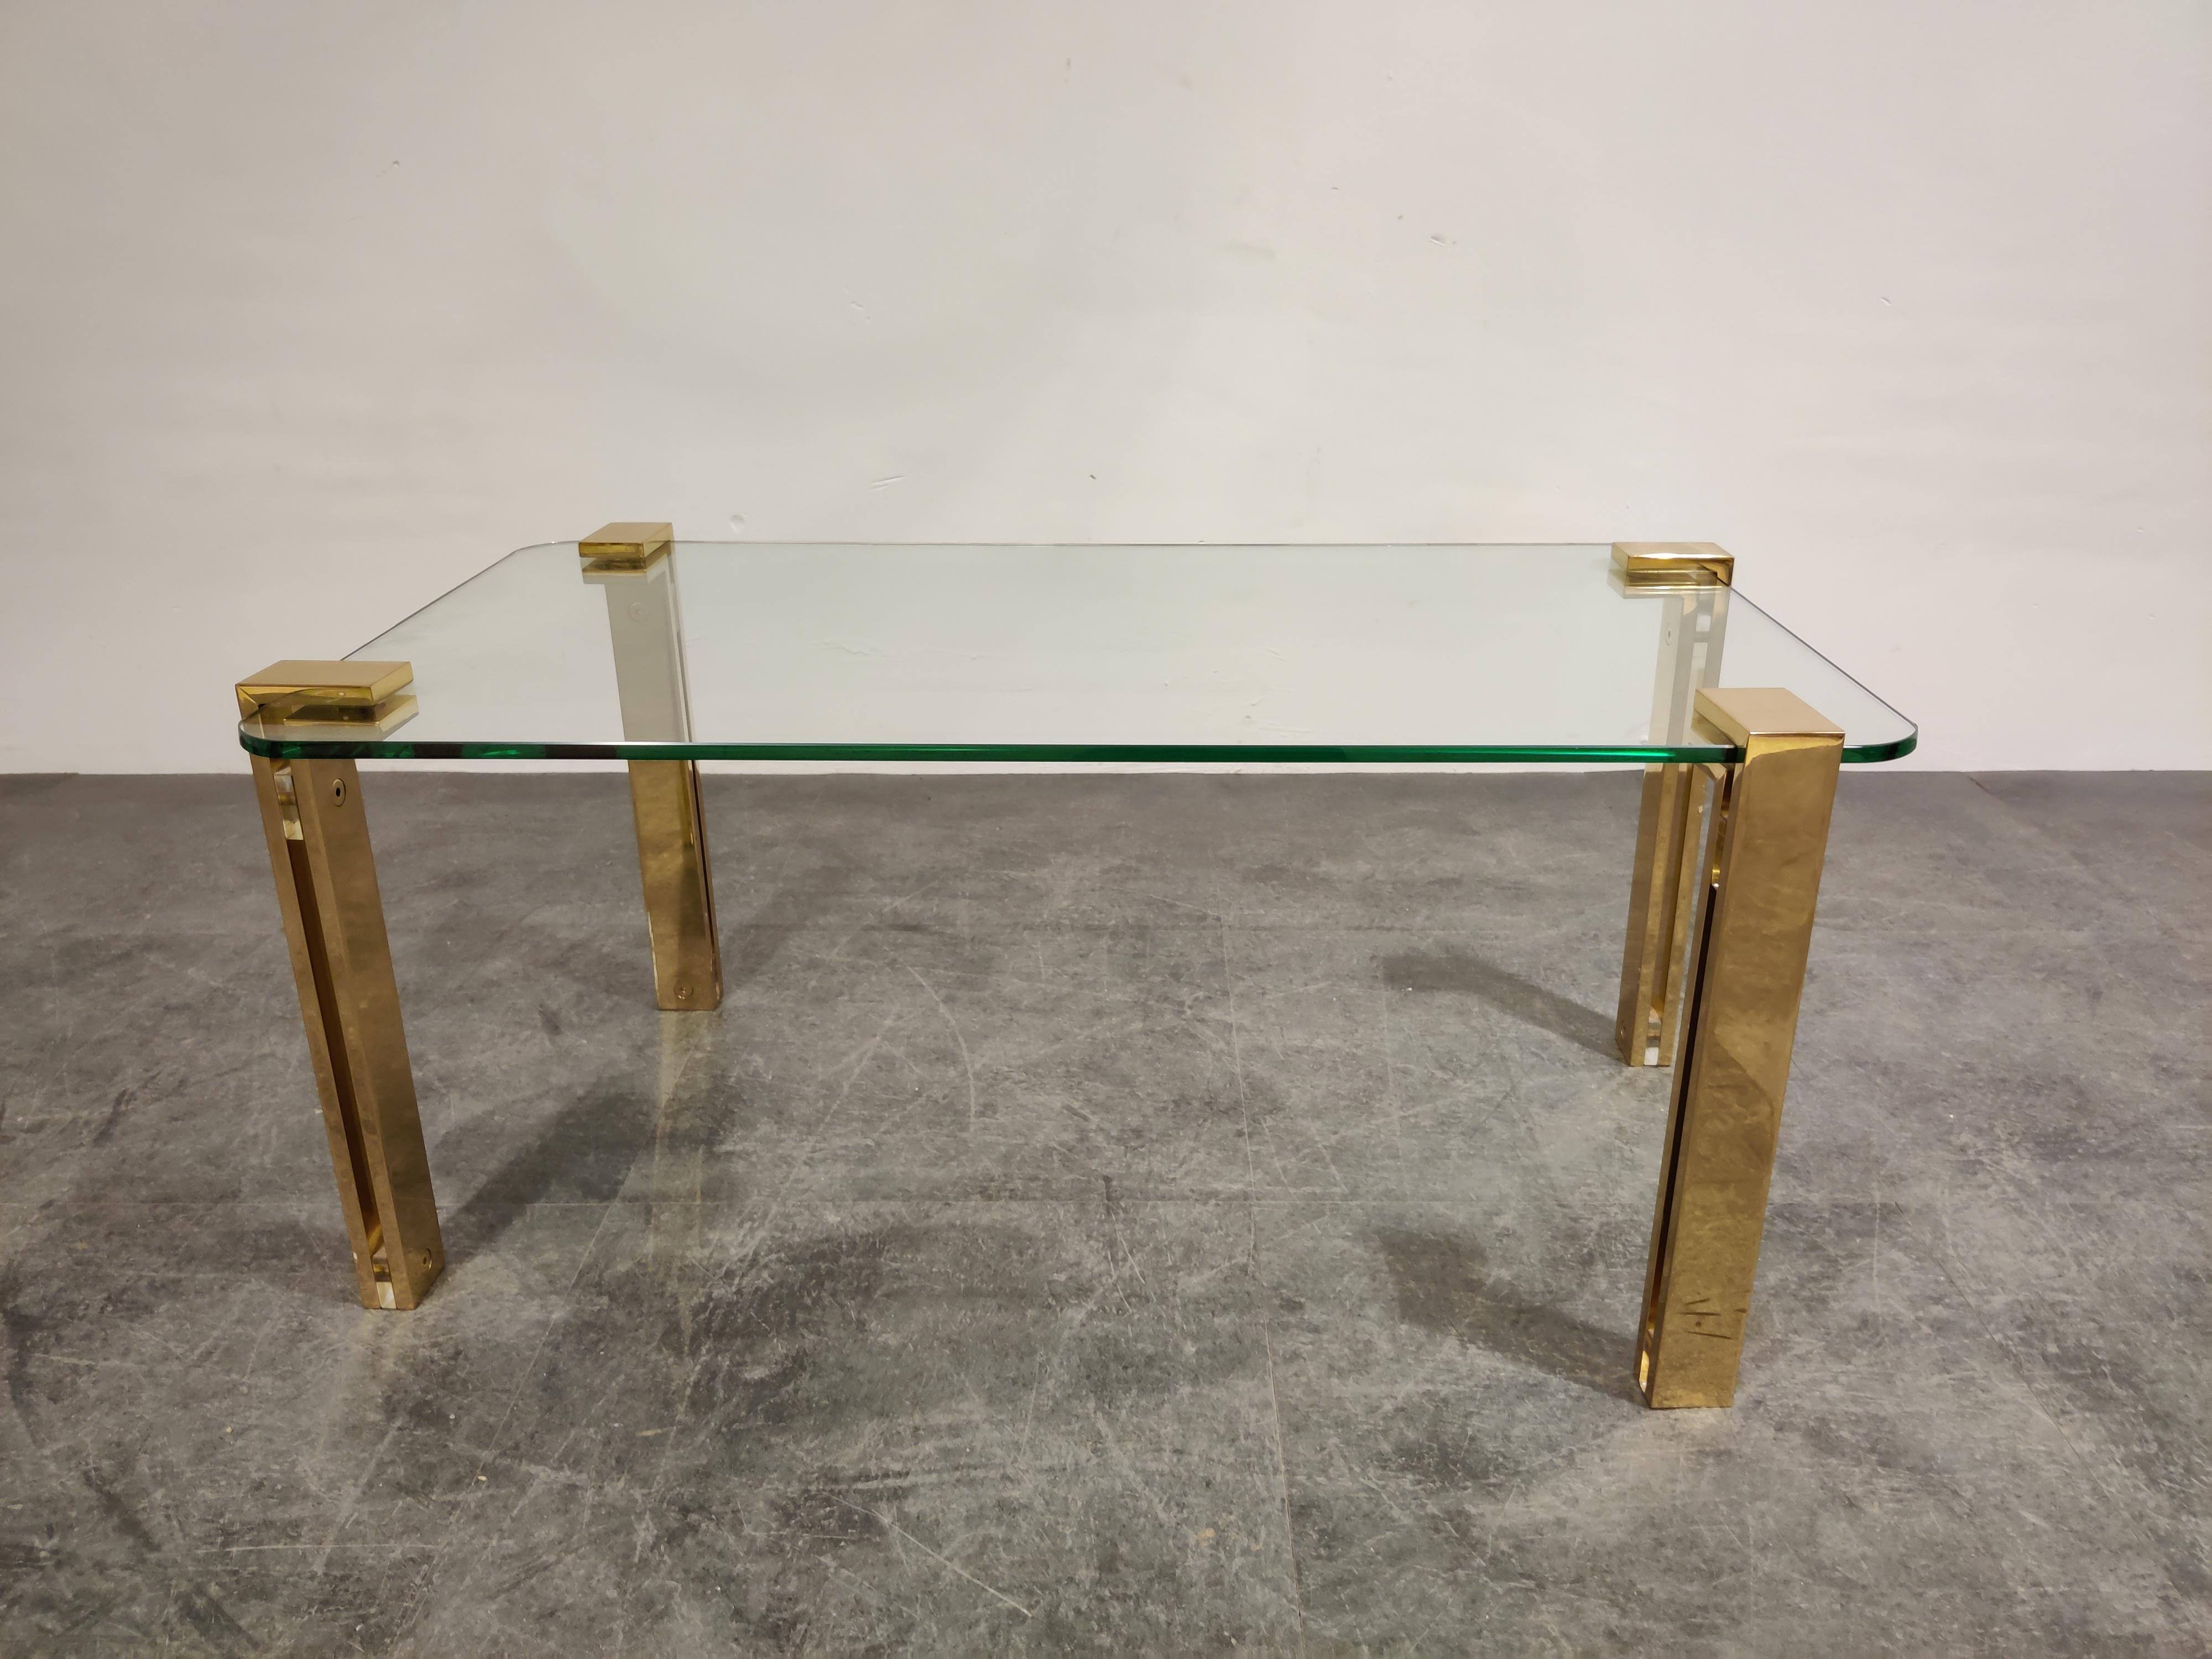 Rectangular clear glass coffee table with brass legs.

The table has the same design features as Peter Ghyczy's coffee tables with a unique way to support the glass so it appears to be floating.

The designer has used heavy two-part brass legs